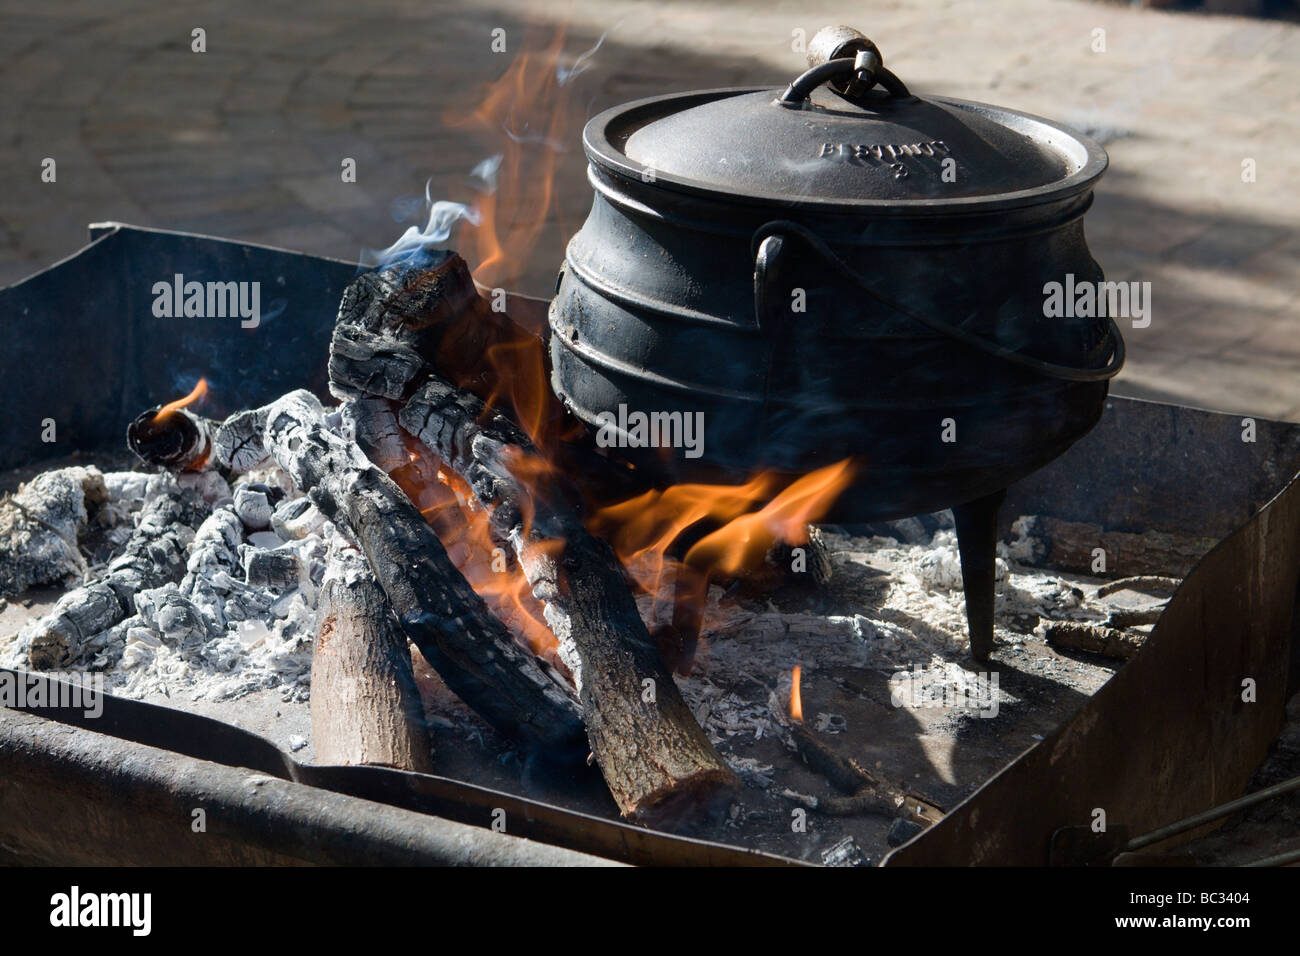 Cooking on an open fire with a cast iron pot. A cast iron pot is used for traditional cooking on an open fire in South Africa. Stock Photo